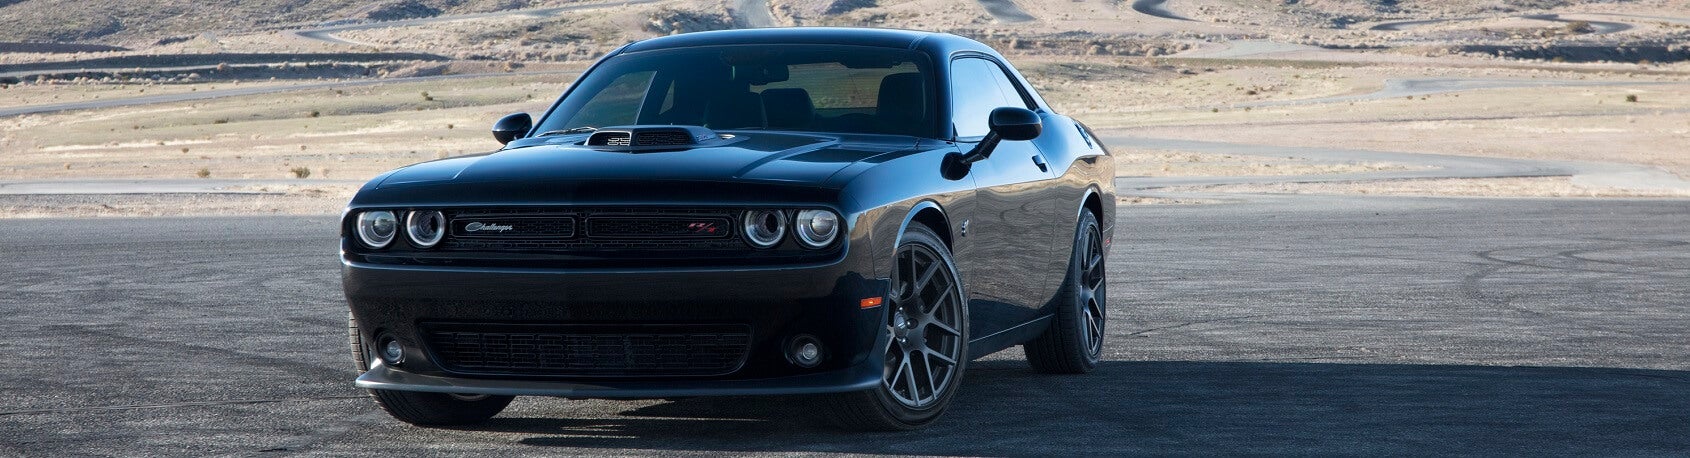 New Dodge Vehicles for Sale